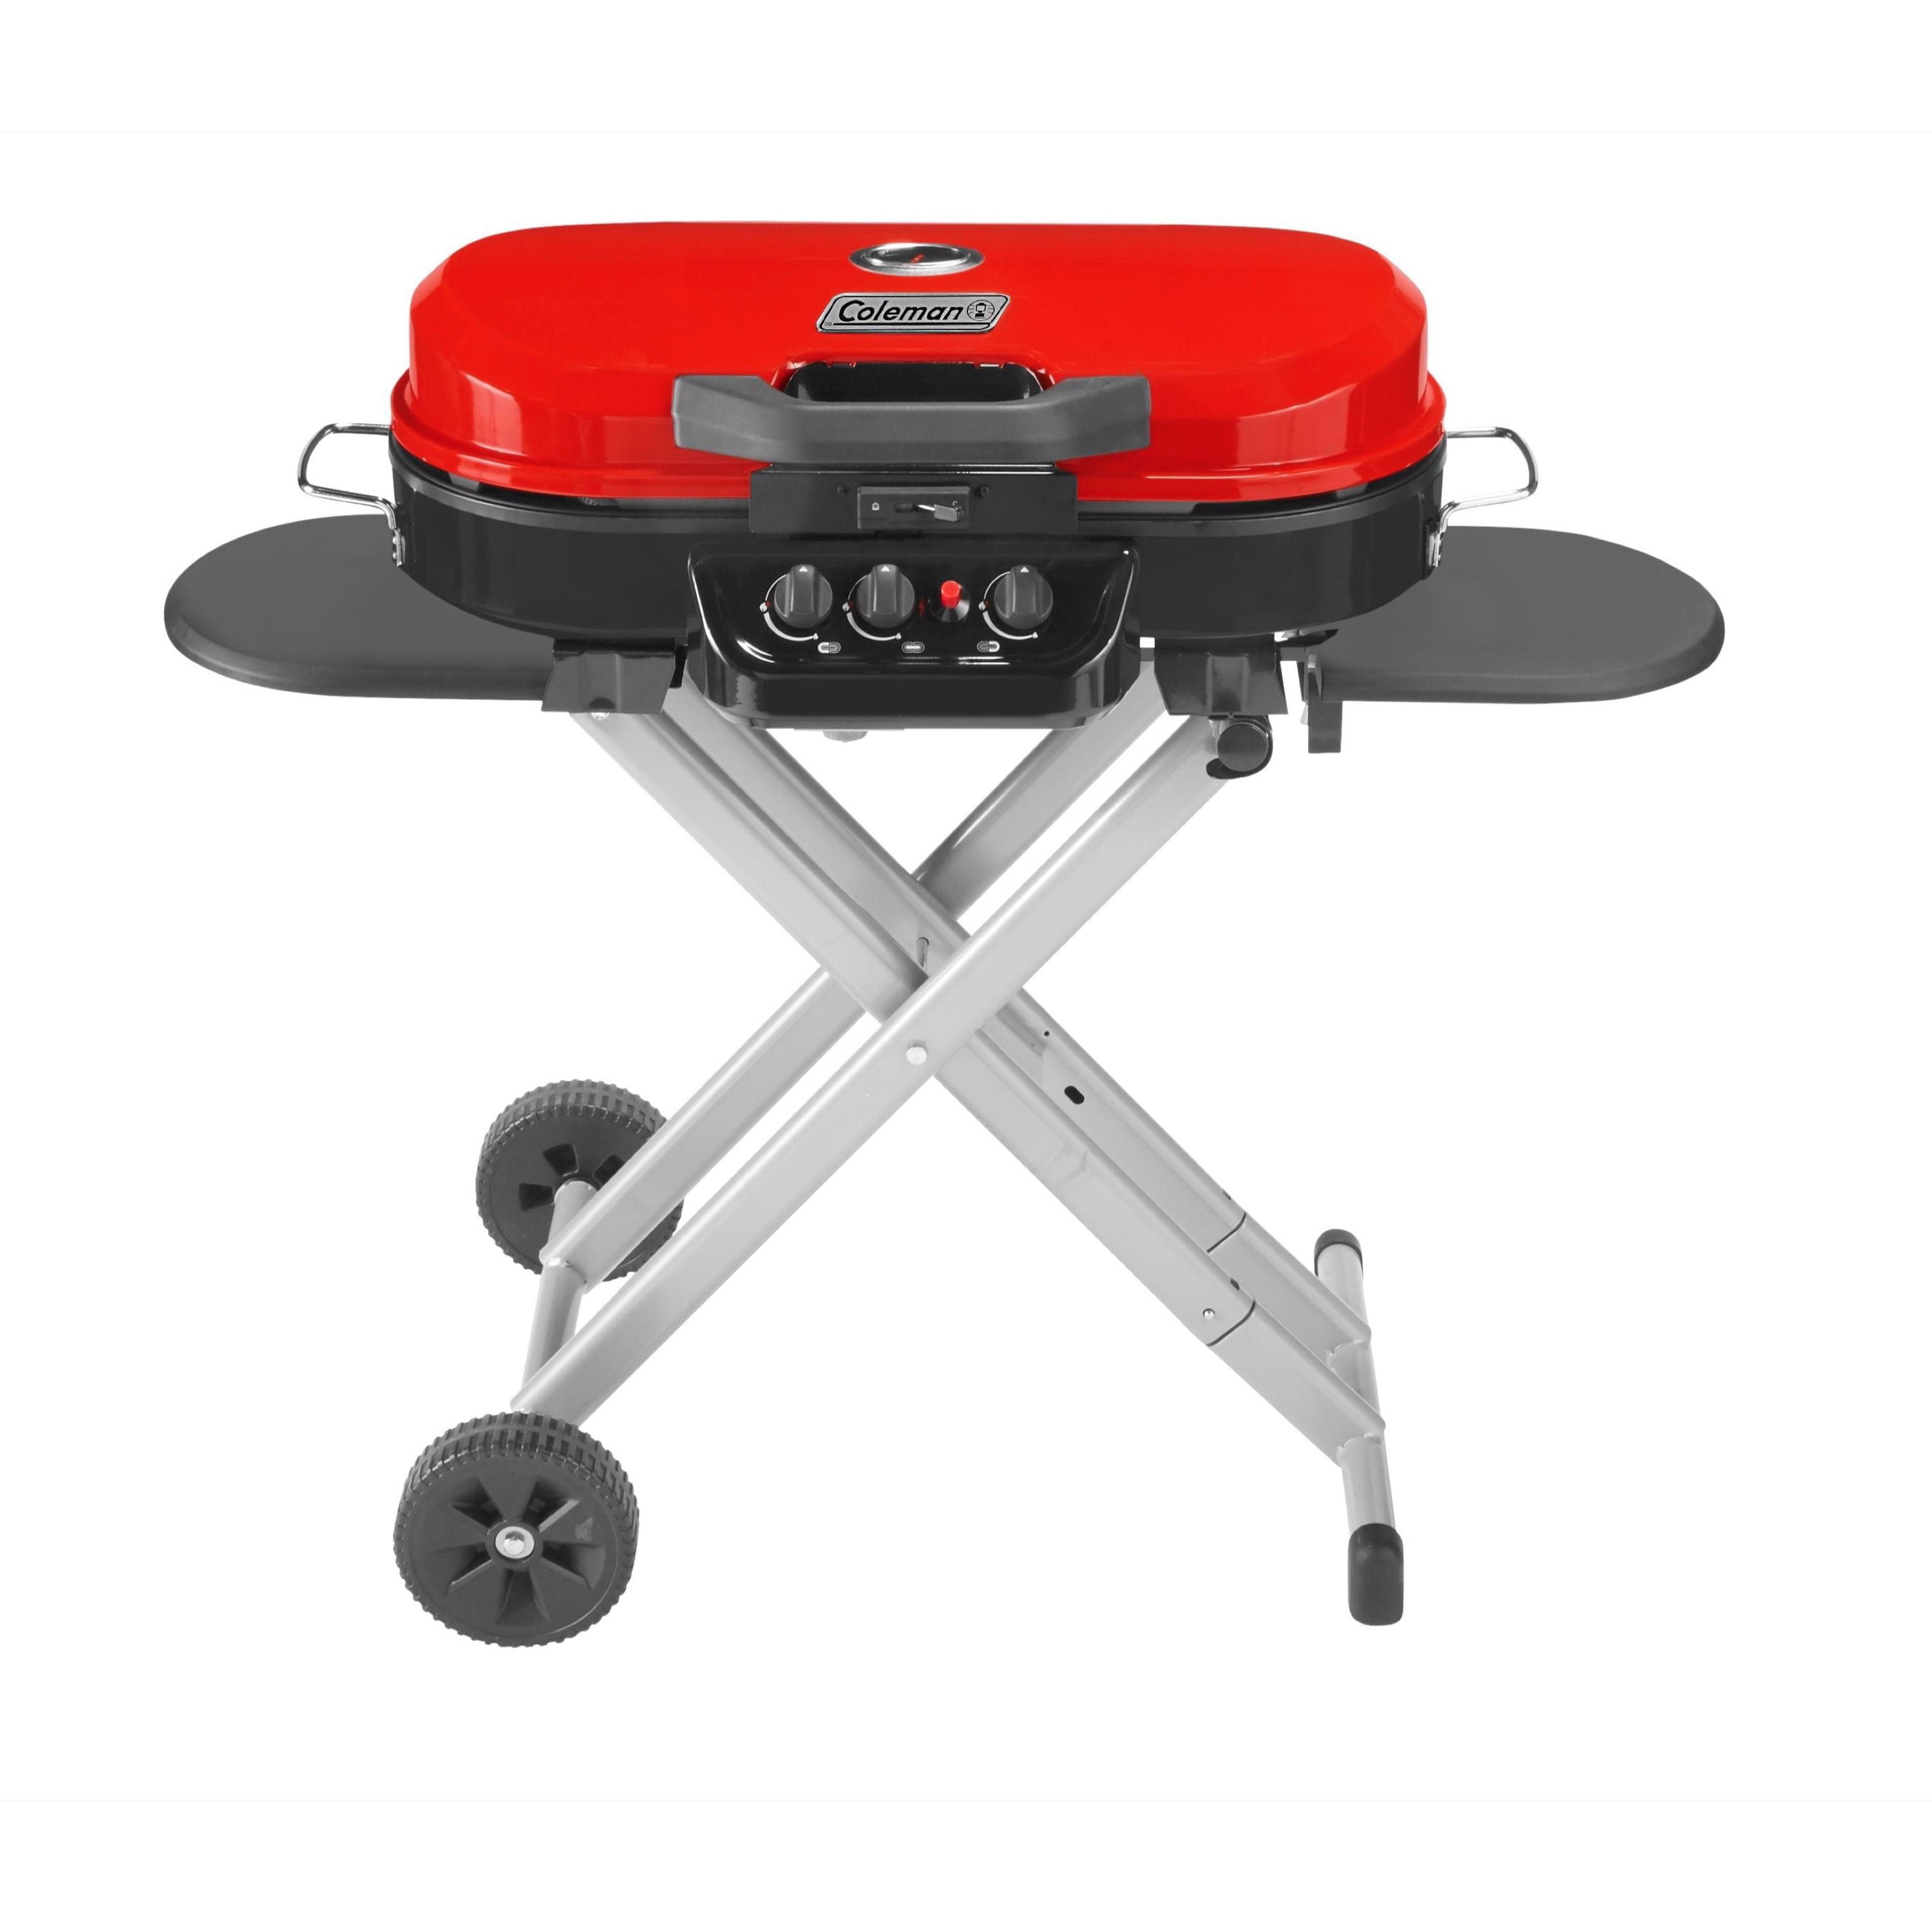 Standup Propane Gas Grill Red, Coleman Fire Pit Grill Combo